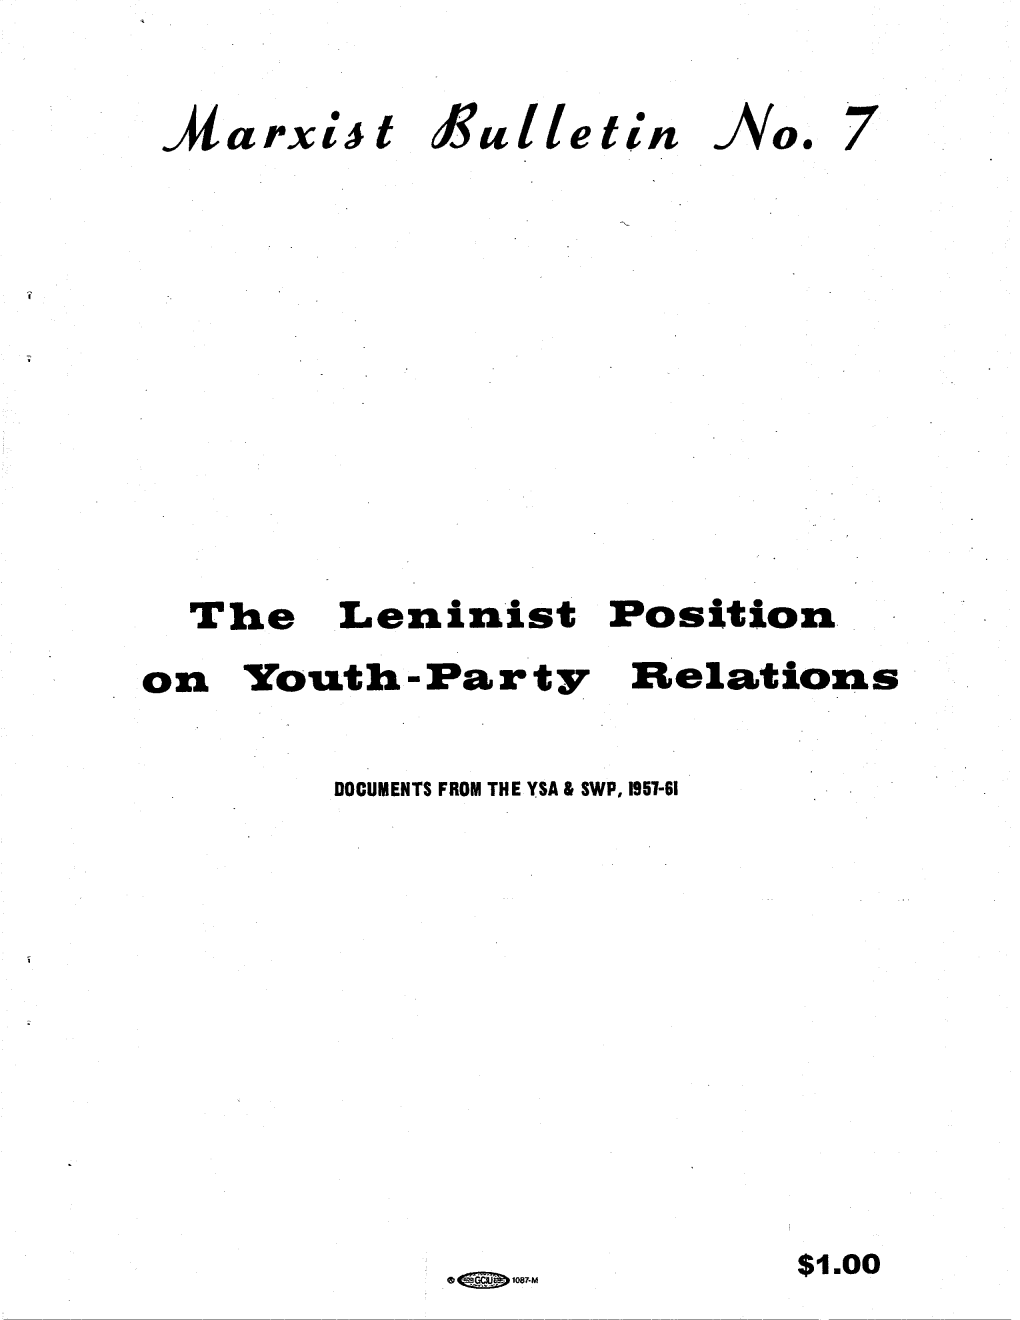 Leninist Position on Youth-Party Relations